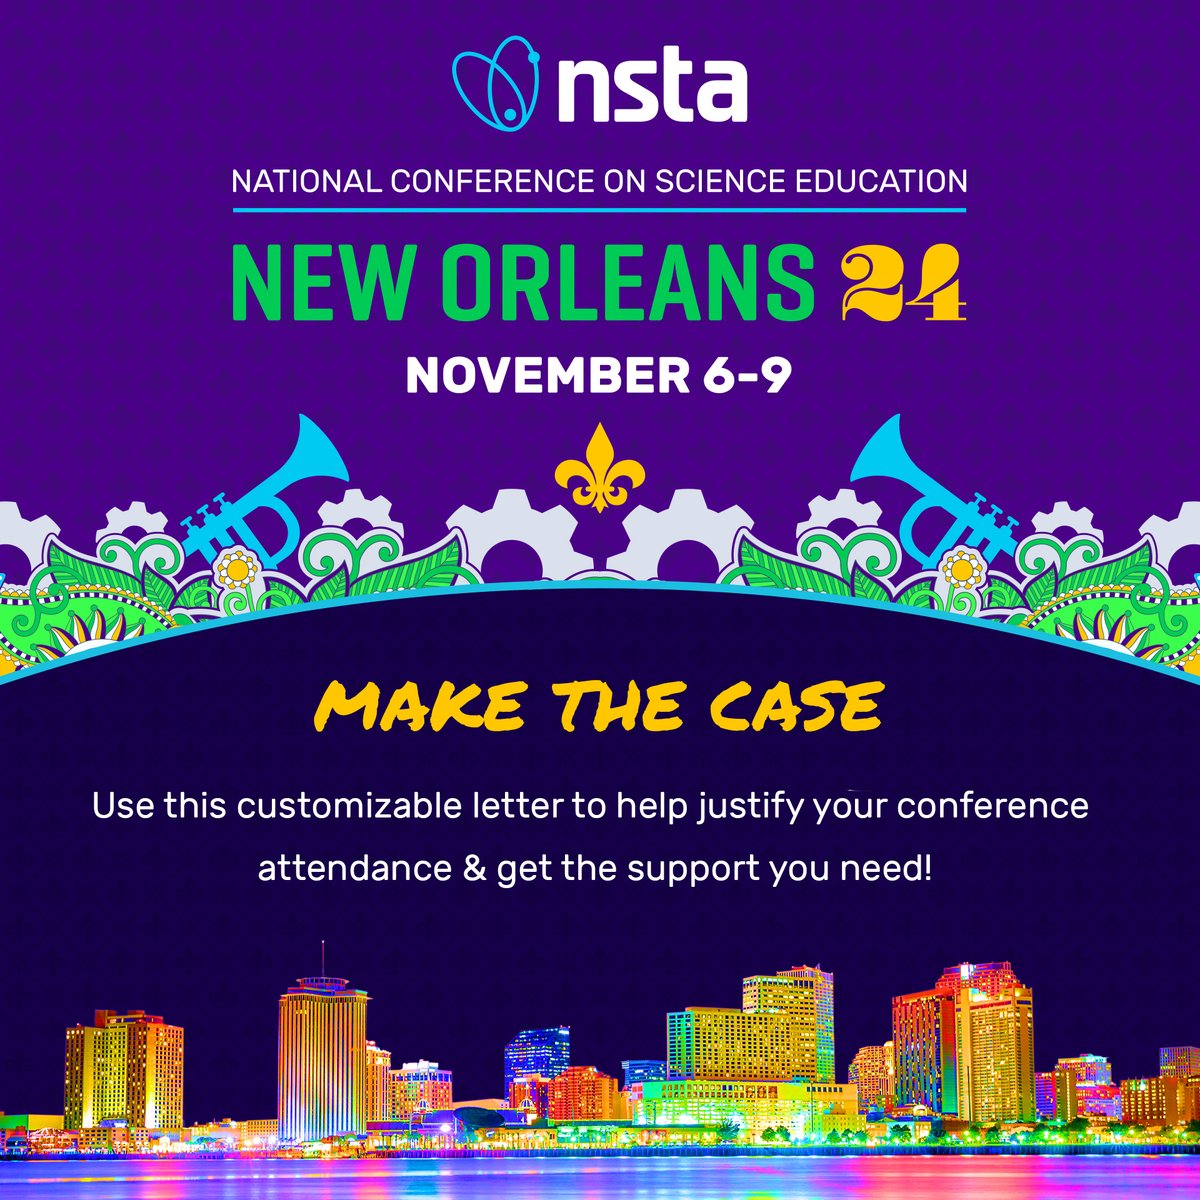 Need funding for the #NSTAFall24 conference? We have a justification letter to help convince administrators of the value of attending. Take advantage of this resource and secure funding to attend! Learn more: bit.ly/3VGnHkk